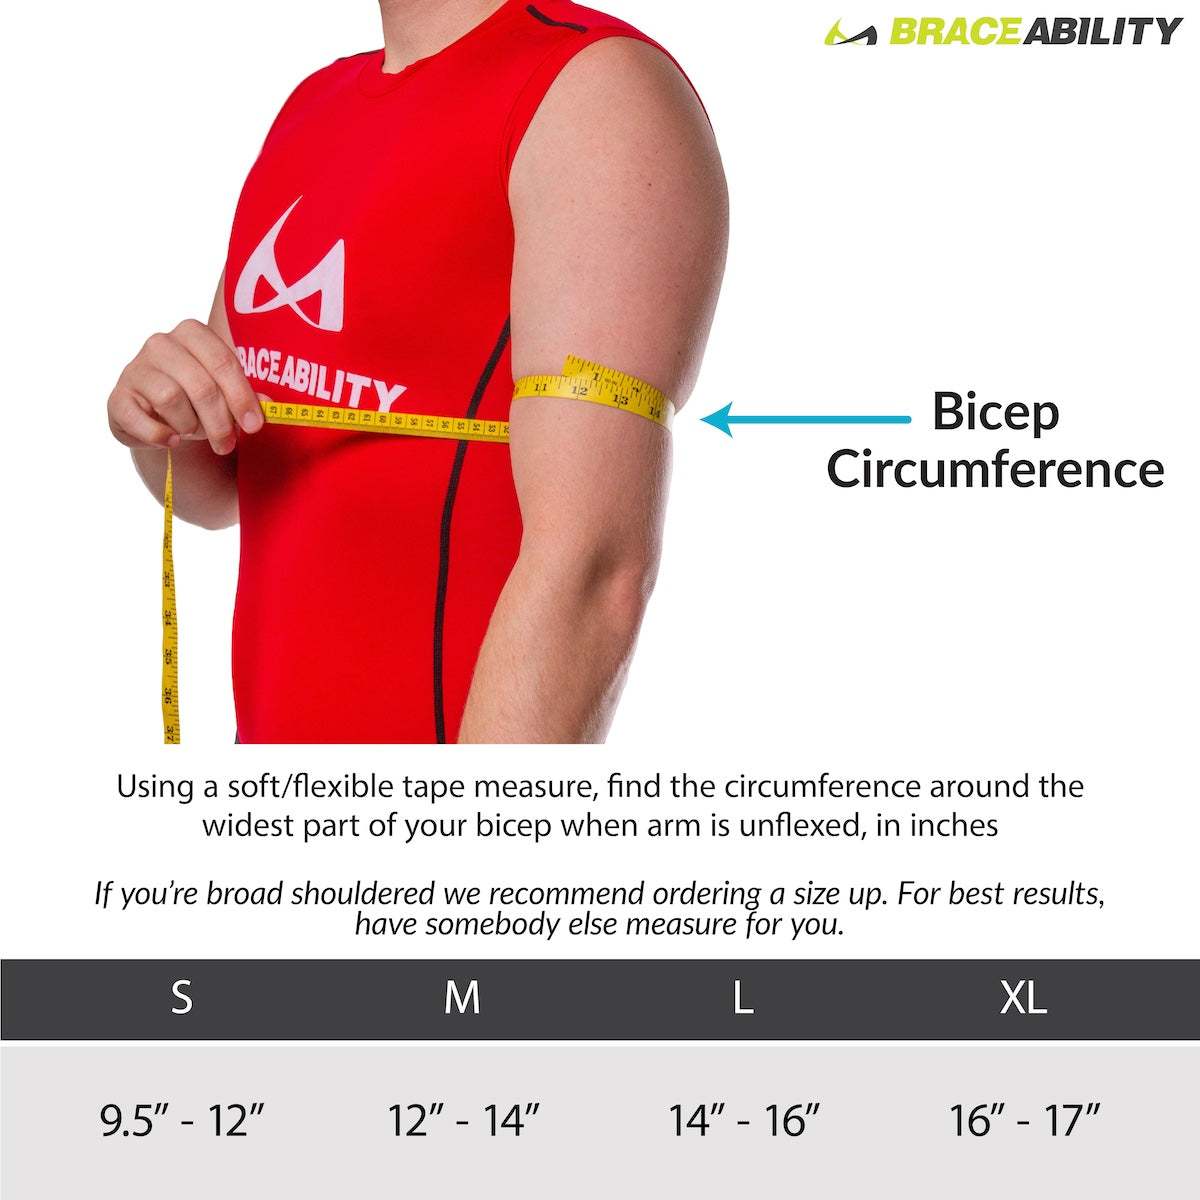 the sarmiento brace sizing chart fits bicep circumferences from 9 to 17 inches in size S-XL